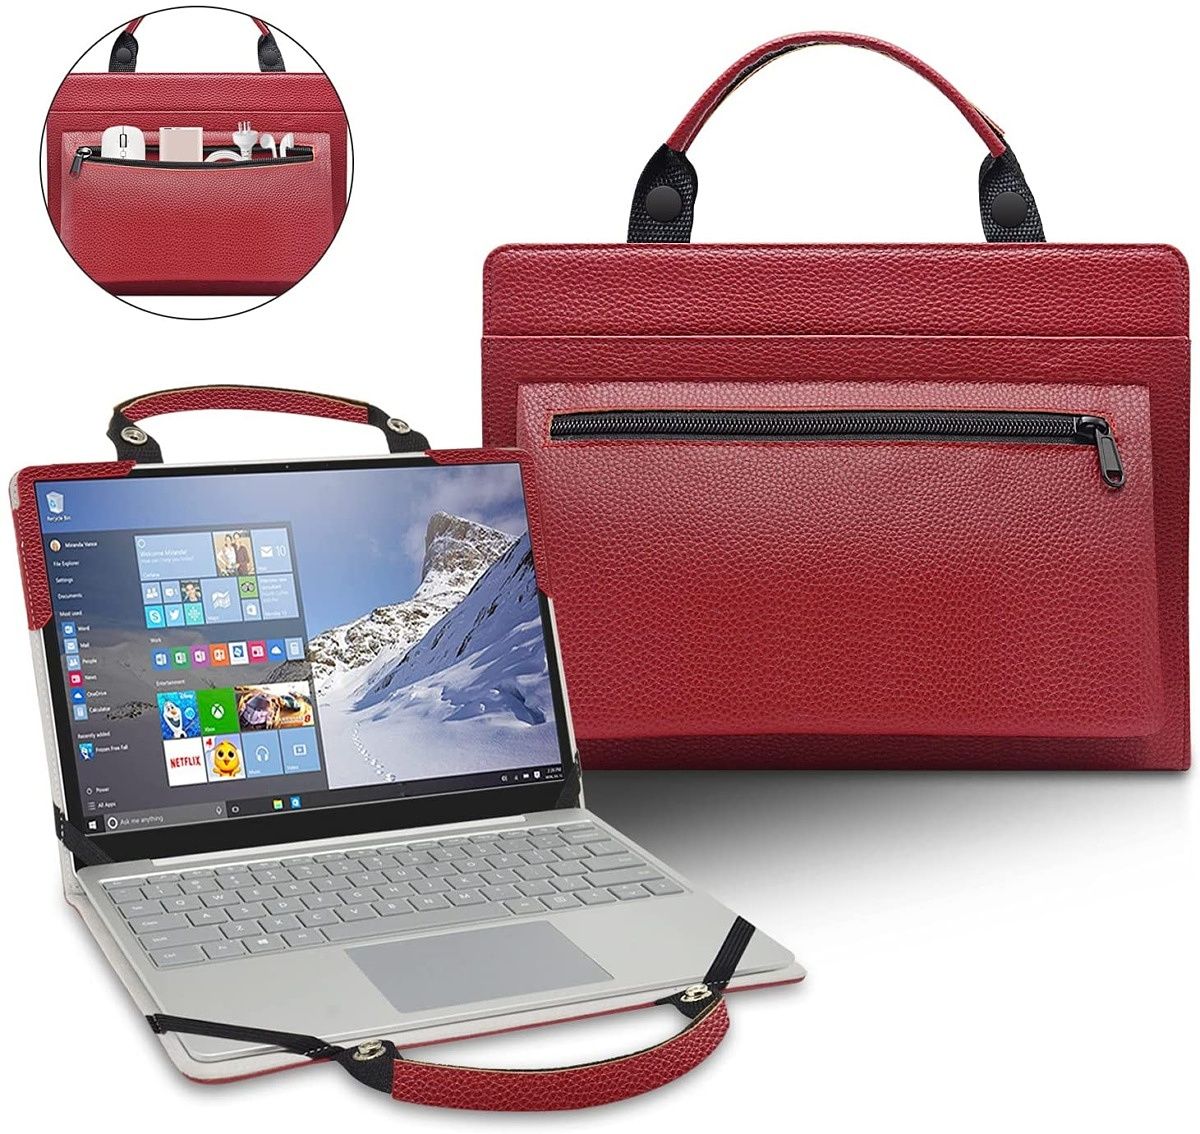 A unique protective case for your Pavilion Aero 13 that doubles as a carrying bag, almost like a small handbag. It also comes with an additional pocket for accessories and three color options.